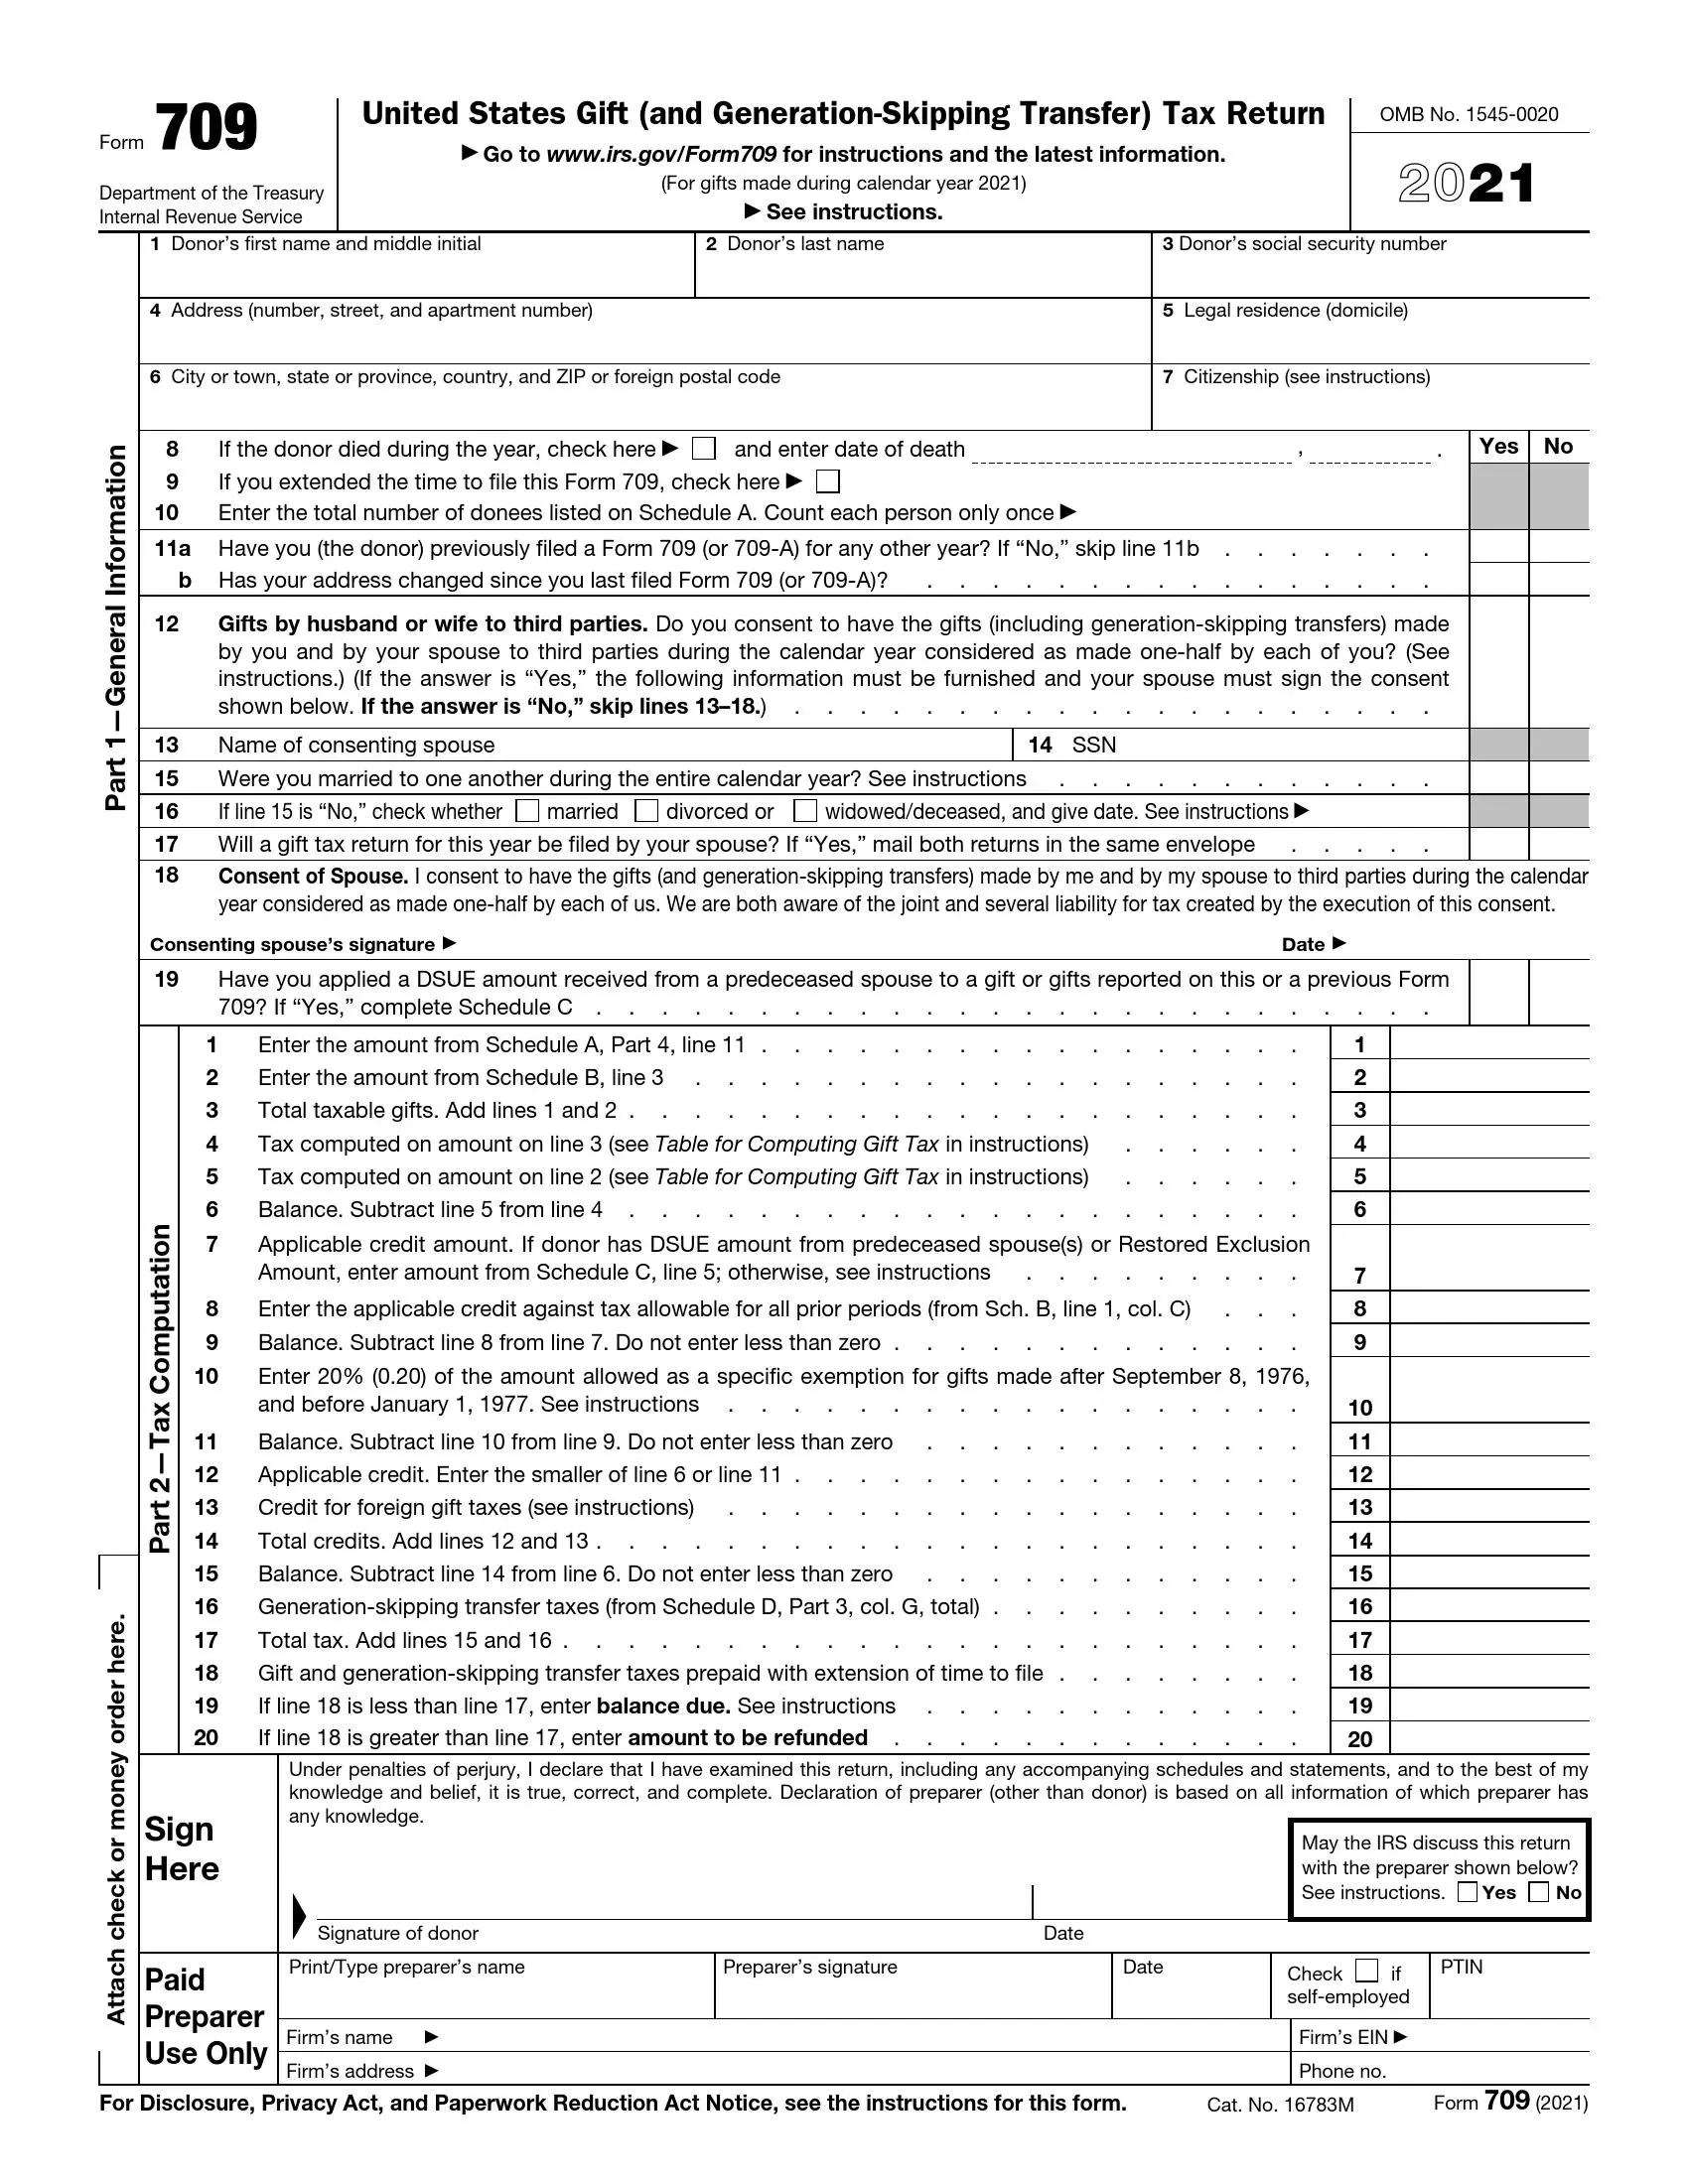 irs form 709 2021 preview